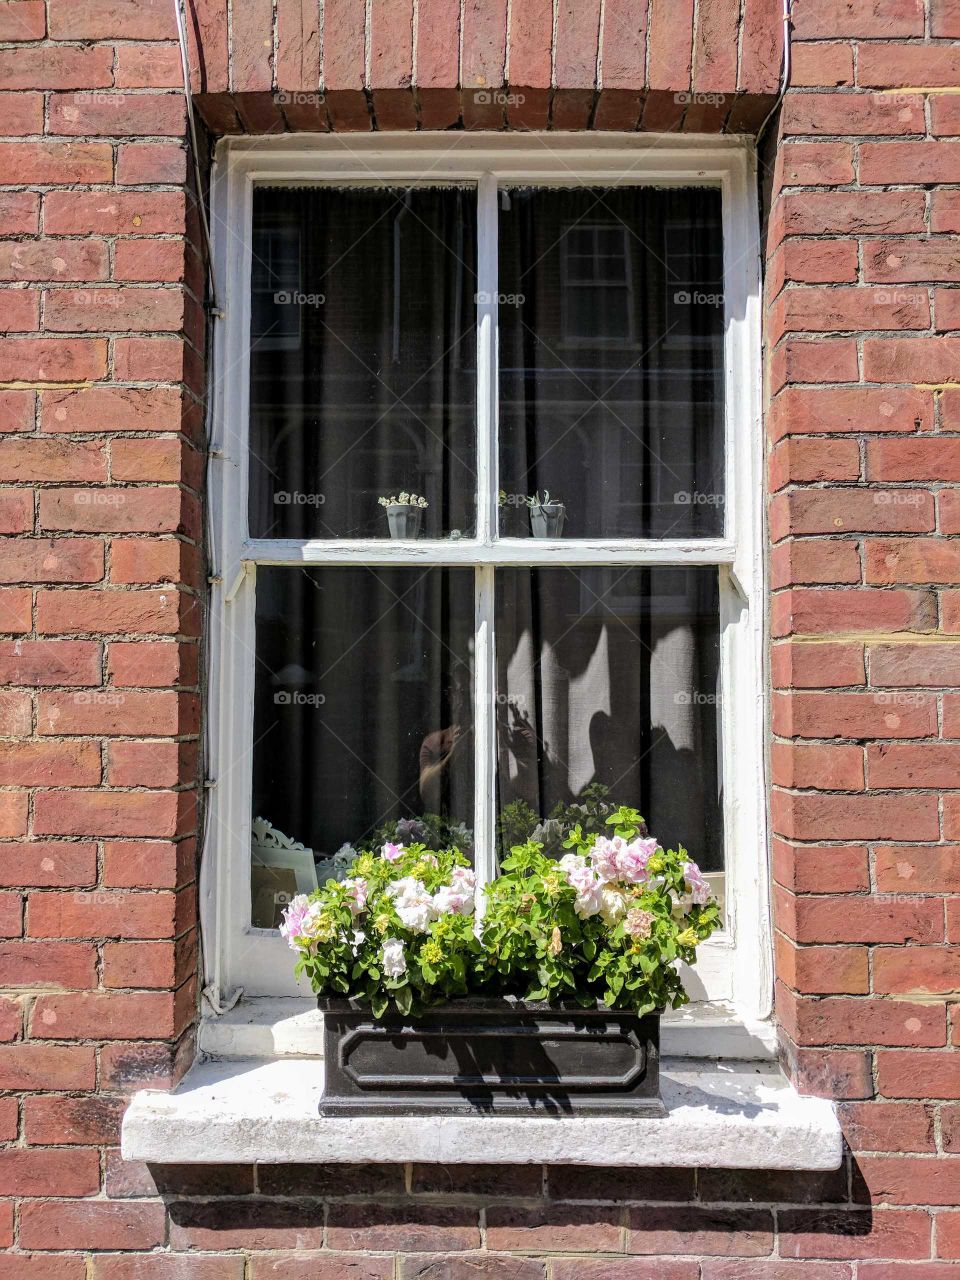 Vintage sash window on a red brick house with a lovely window box of white and pink flowers